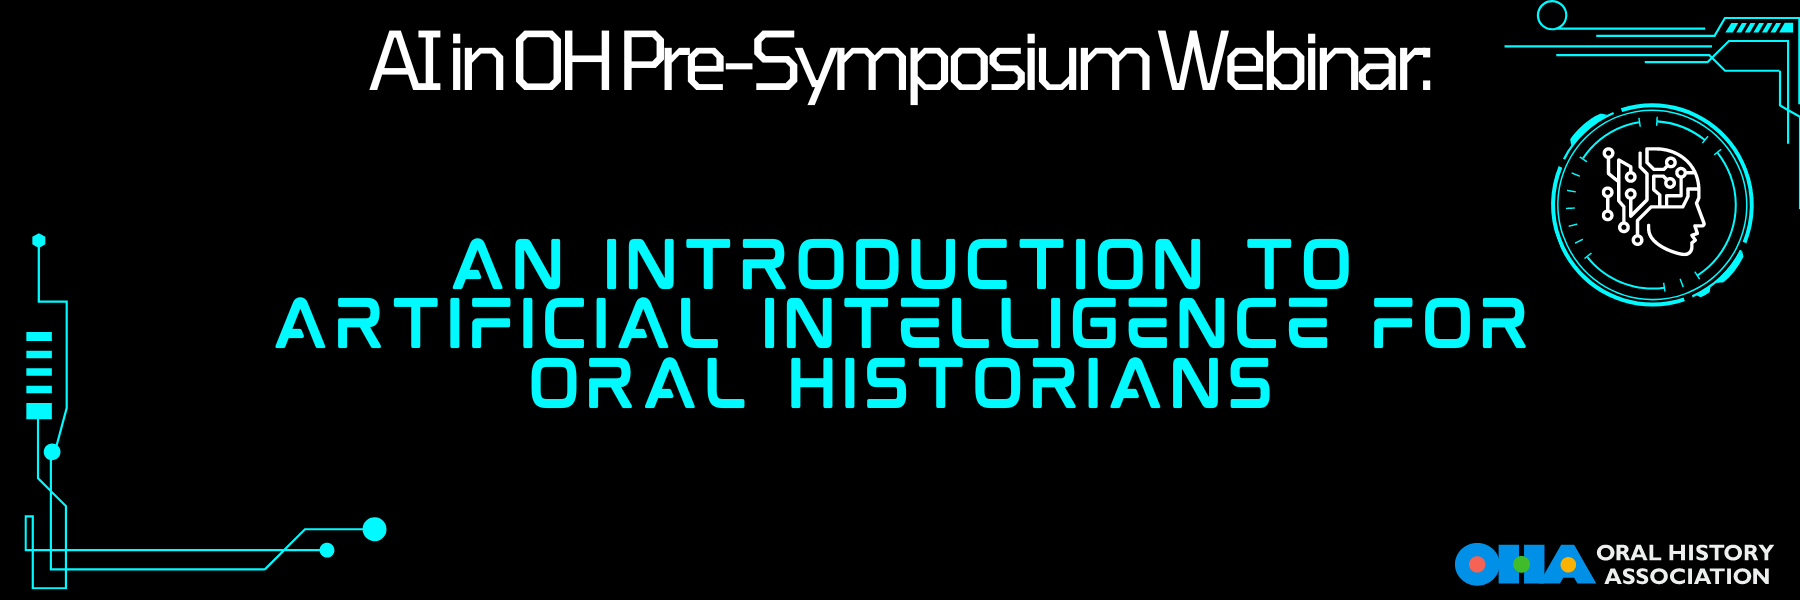 Upcoming Pre-Symposium Webinar: An Introduction to Artificial Intelligence for Oral Historians